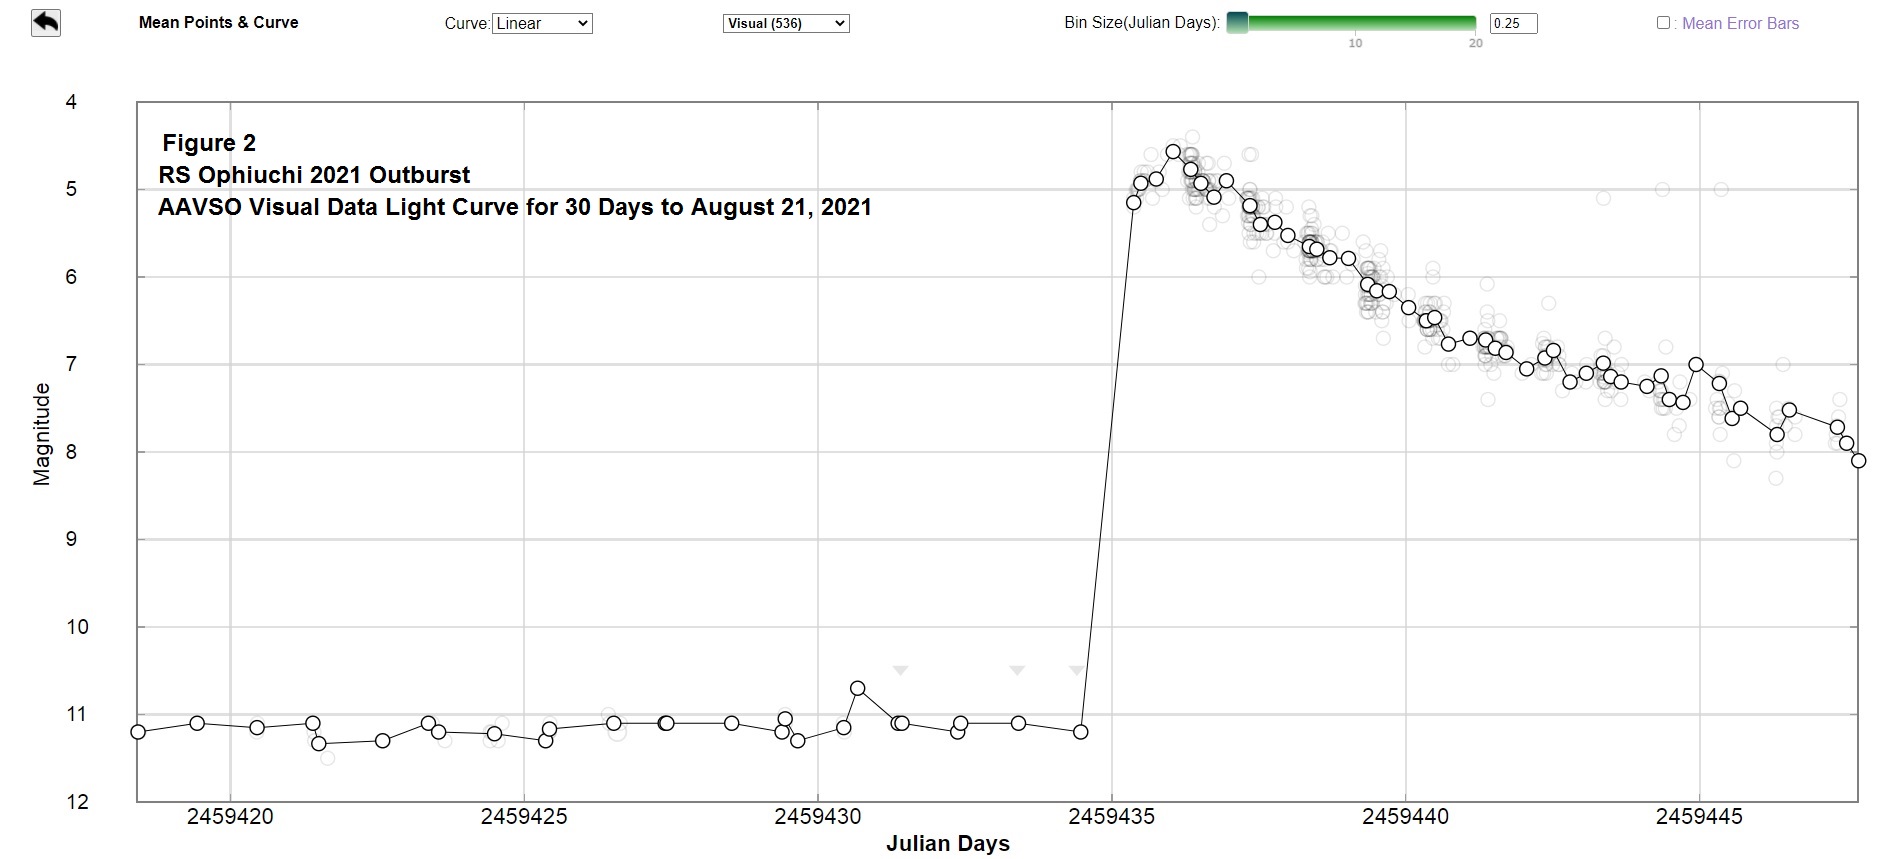 Light Curve showing the early stages of the 2021 outburst of RS Oph based on the AAVSO visual data